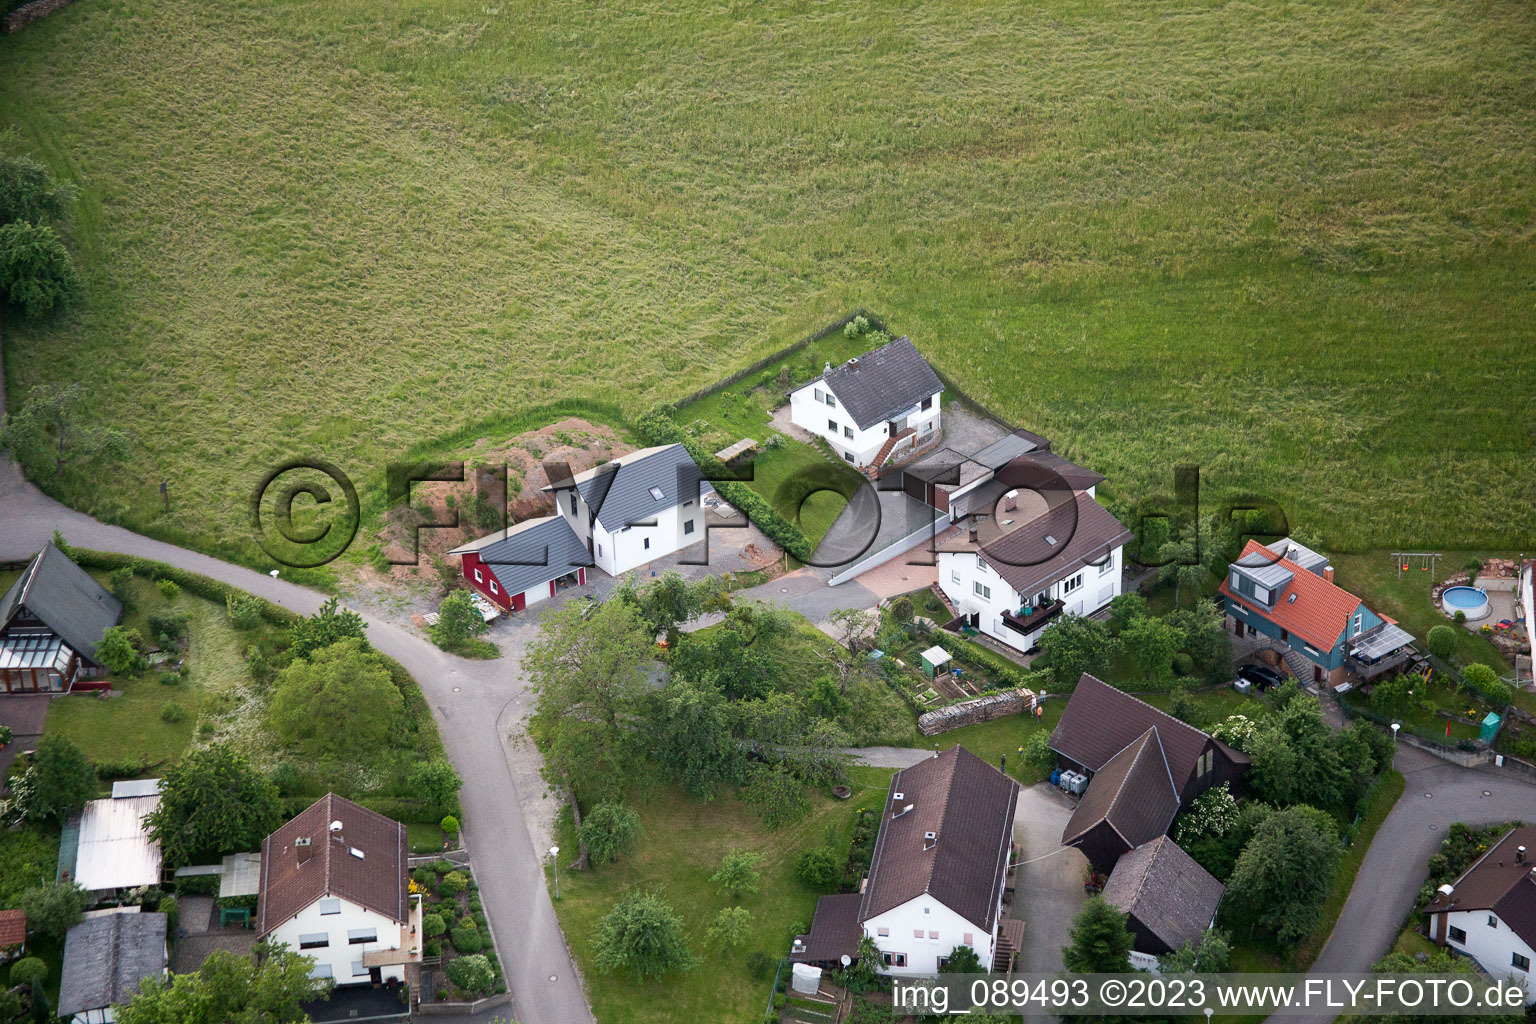 Brombach in the state Baden-Wuerttemberg, Germany seen from above